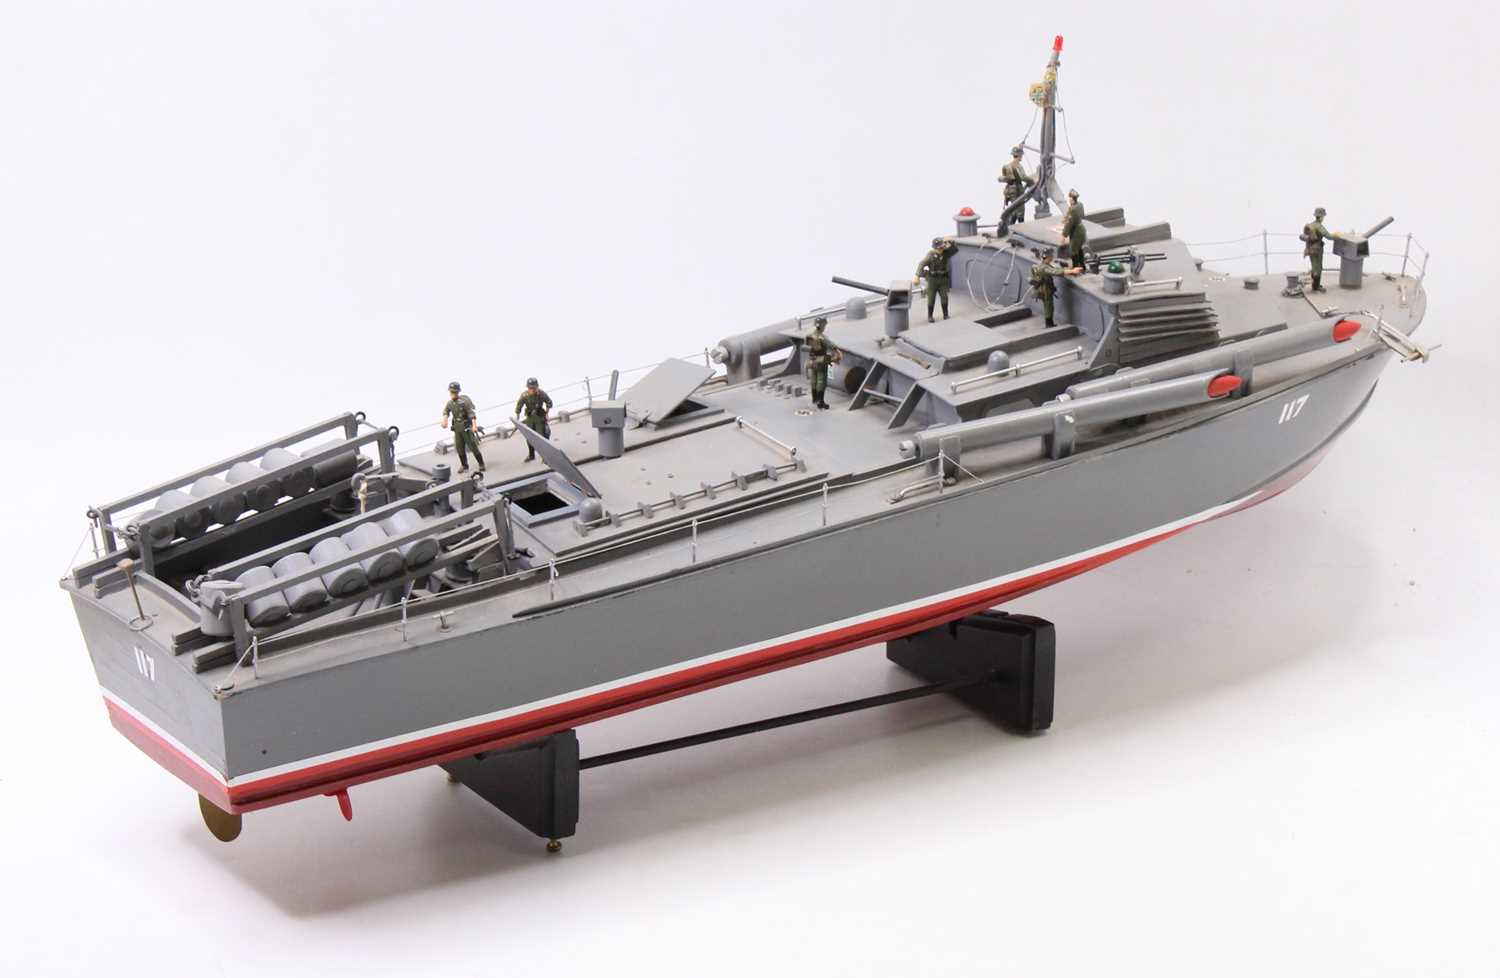 A very well made balsa wood with GPR hull, German WWII Attack Torpedo patrol boat finished in grey - Image 3 of 5